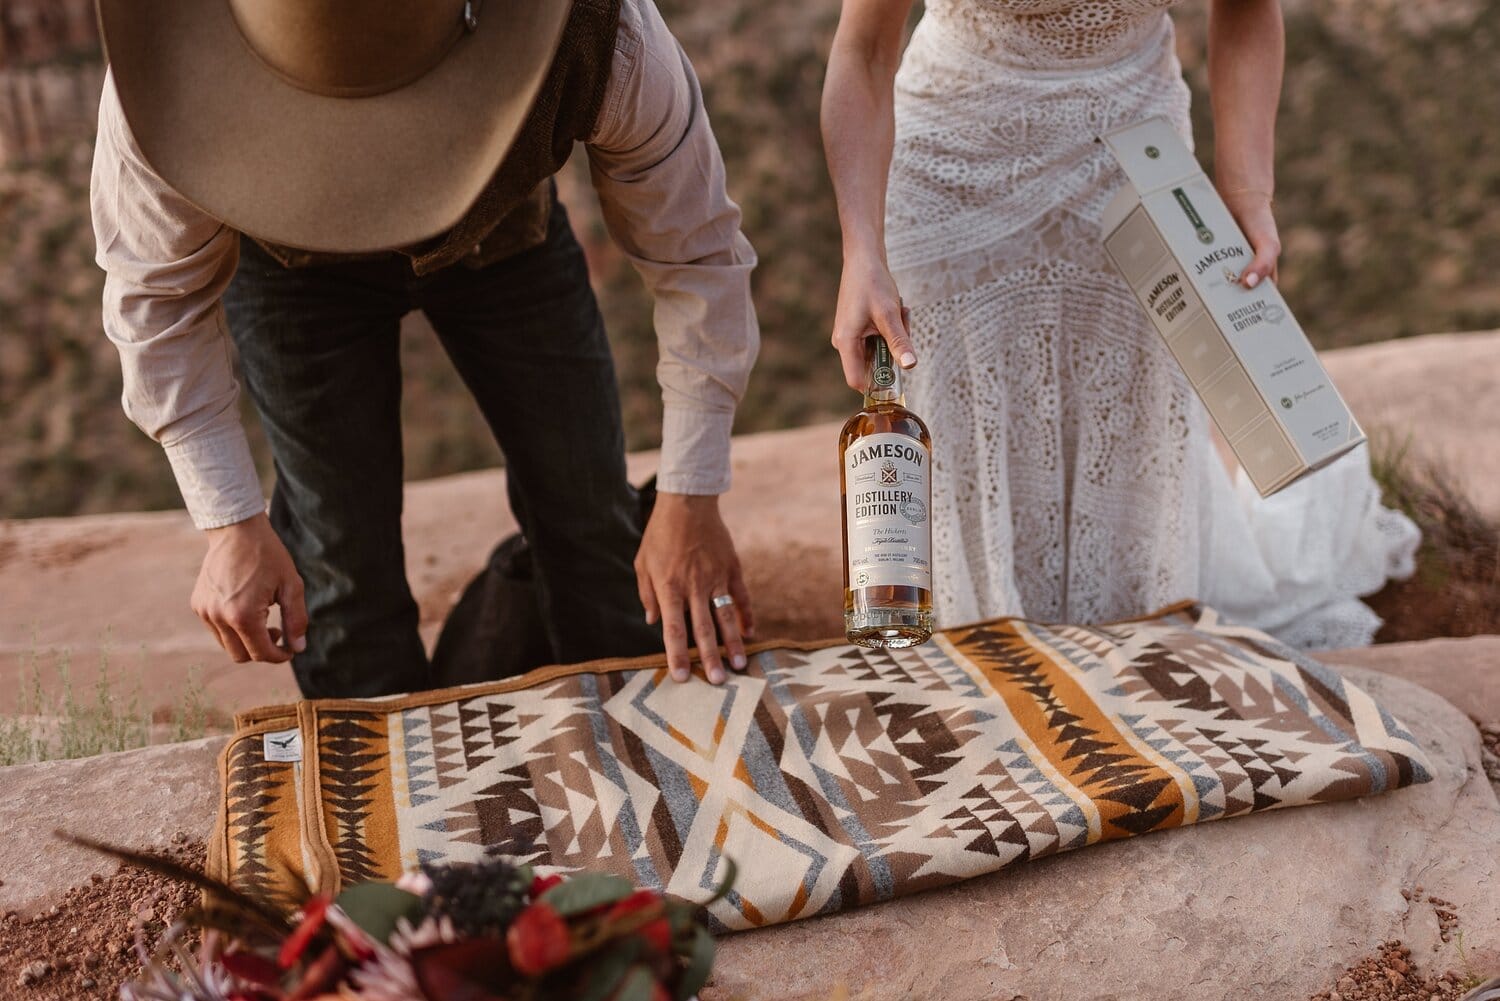 Bride and groom set up picnic at Colorado National Monument. 